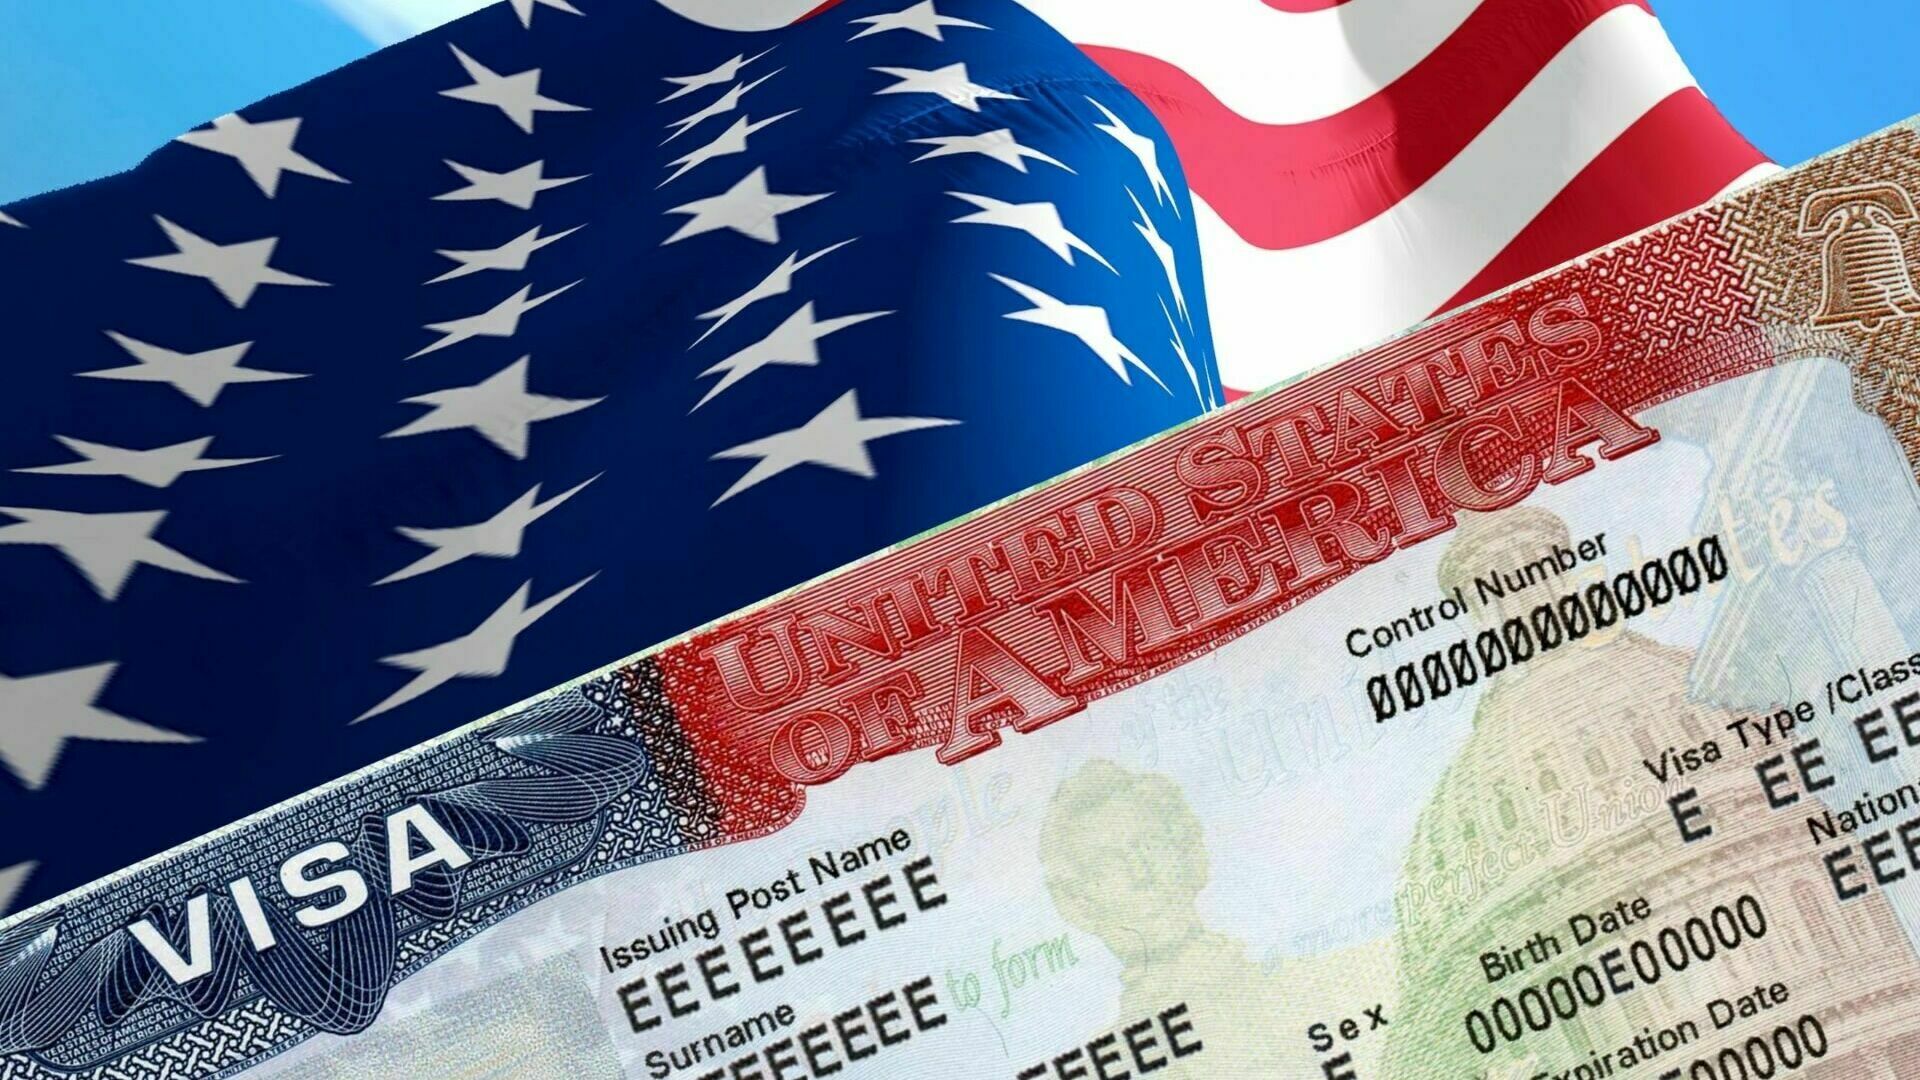 Not enemies anymore? The United States began to refuse to issue visas to Russians less